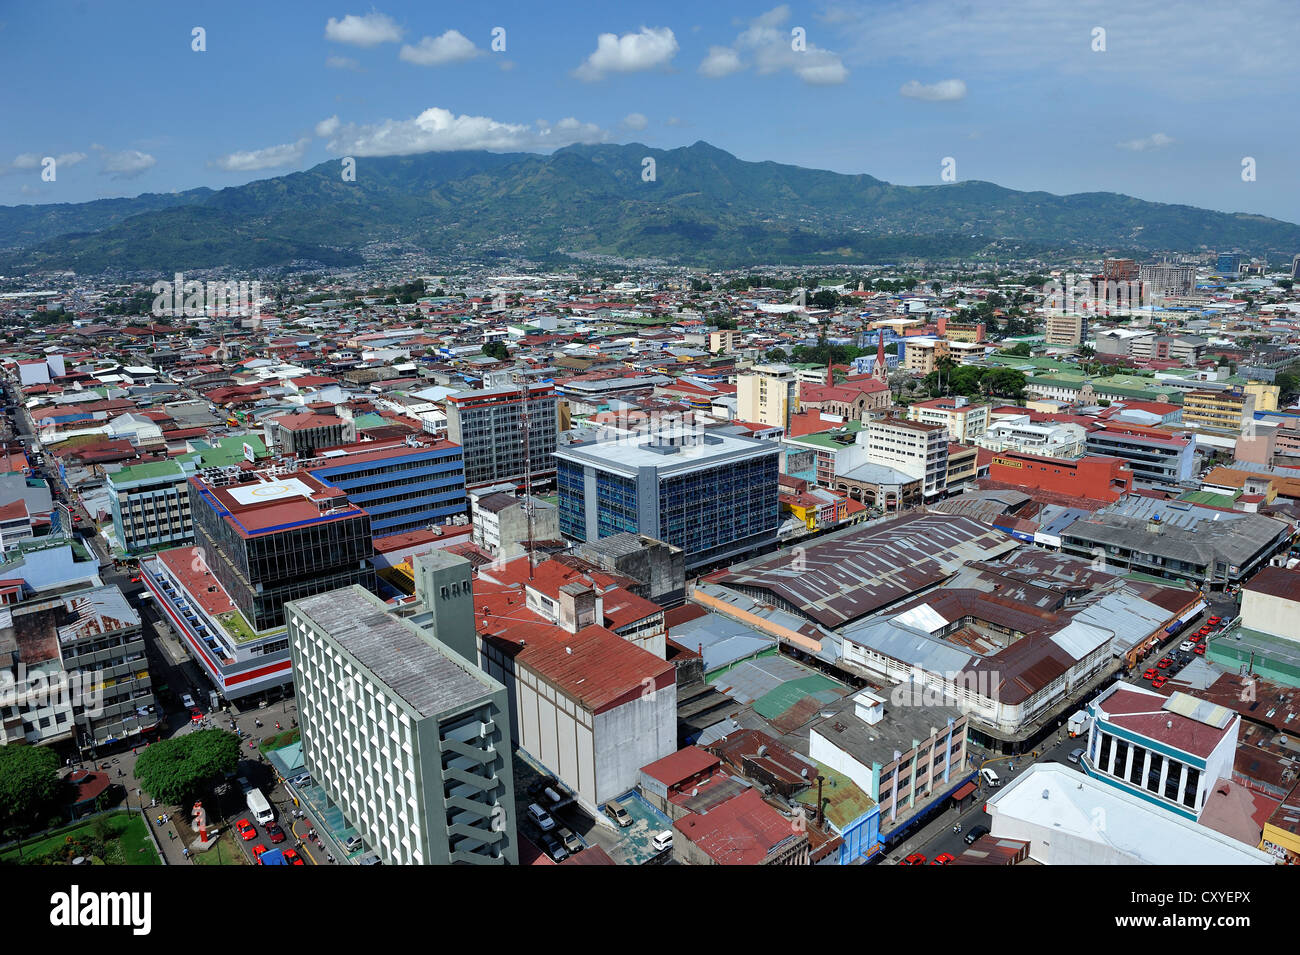 Aerial view, view of the city centre of San Jose, Costa Rica, Latin America, Central America Stock Photo